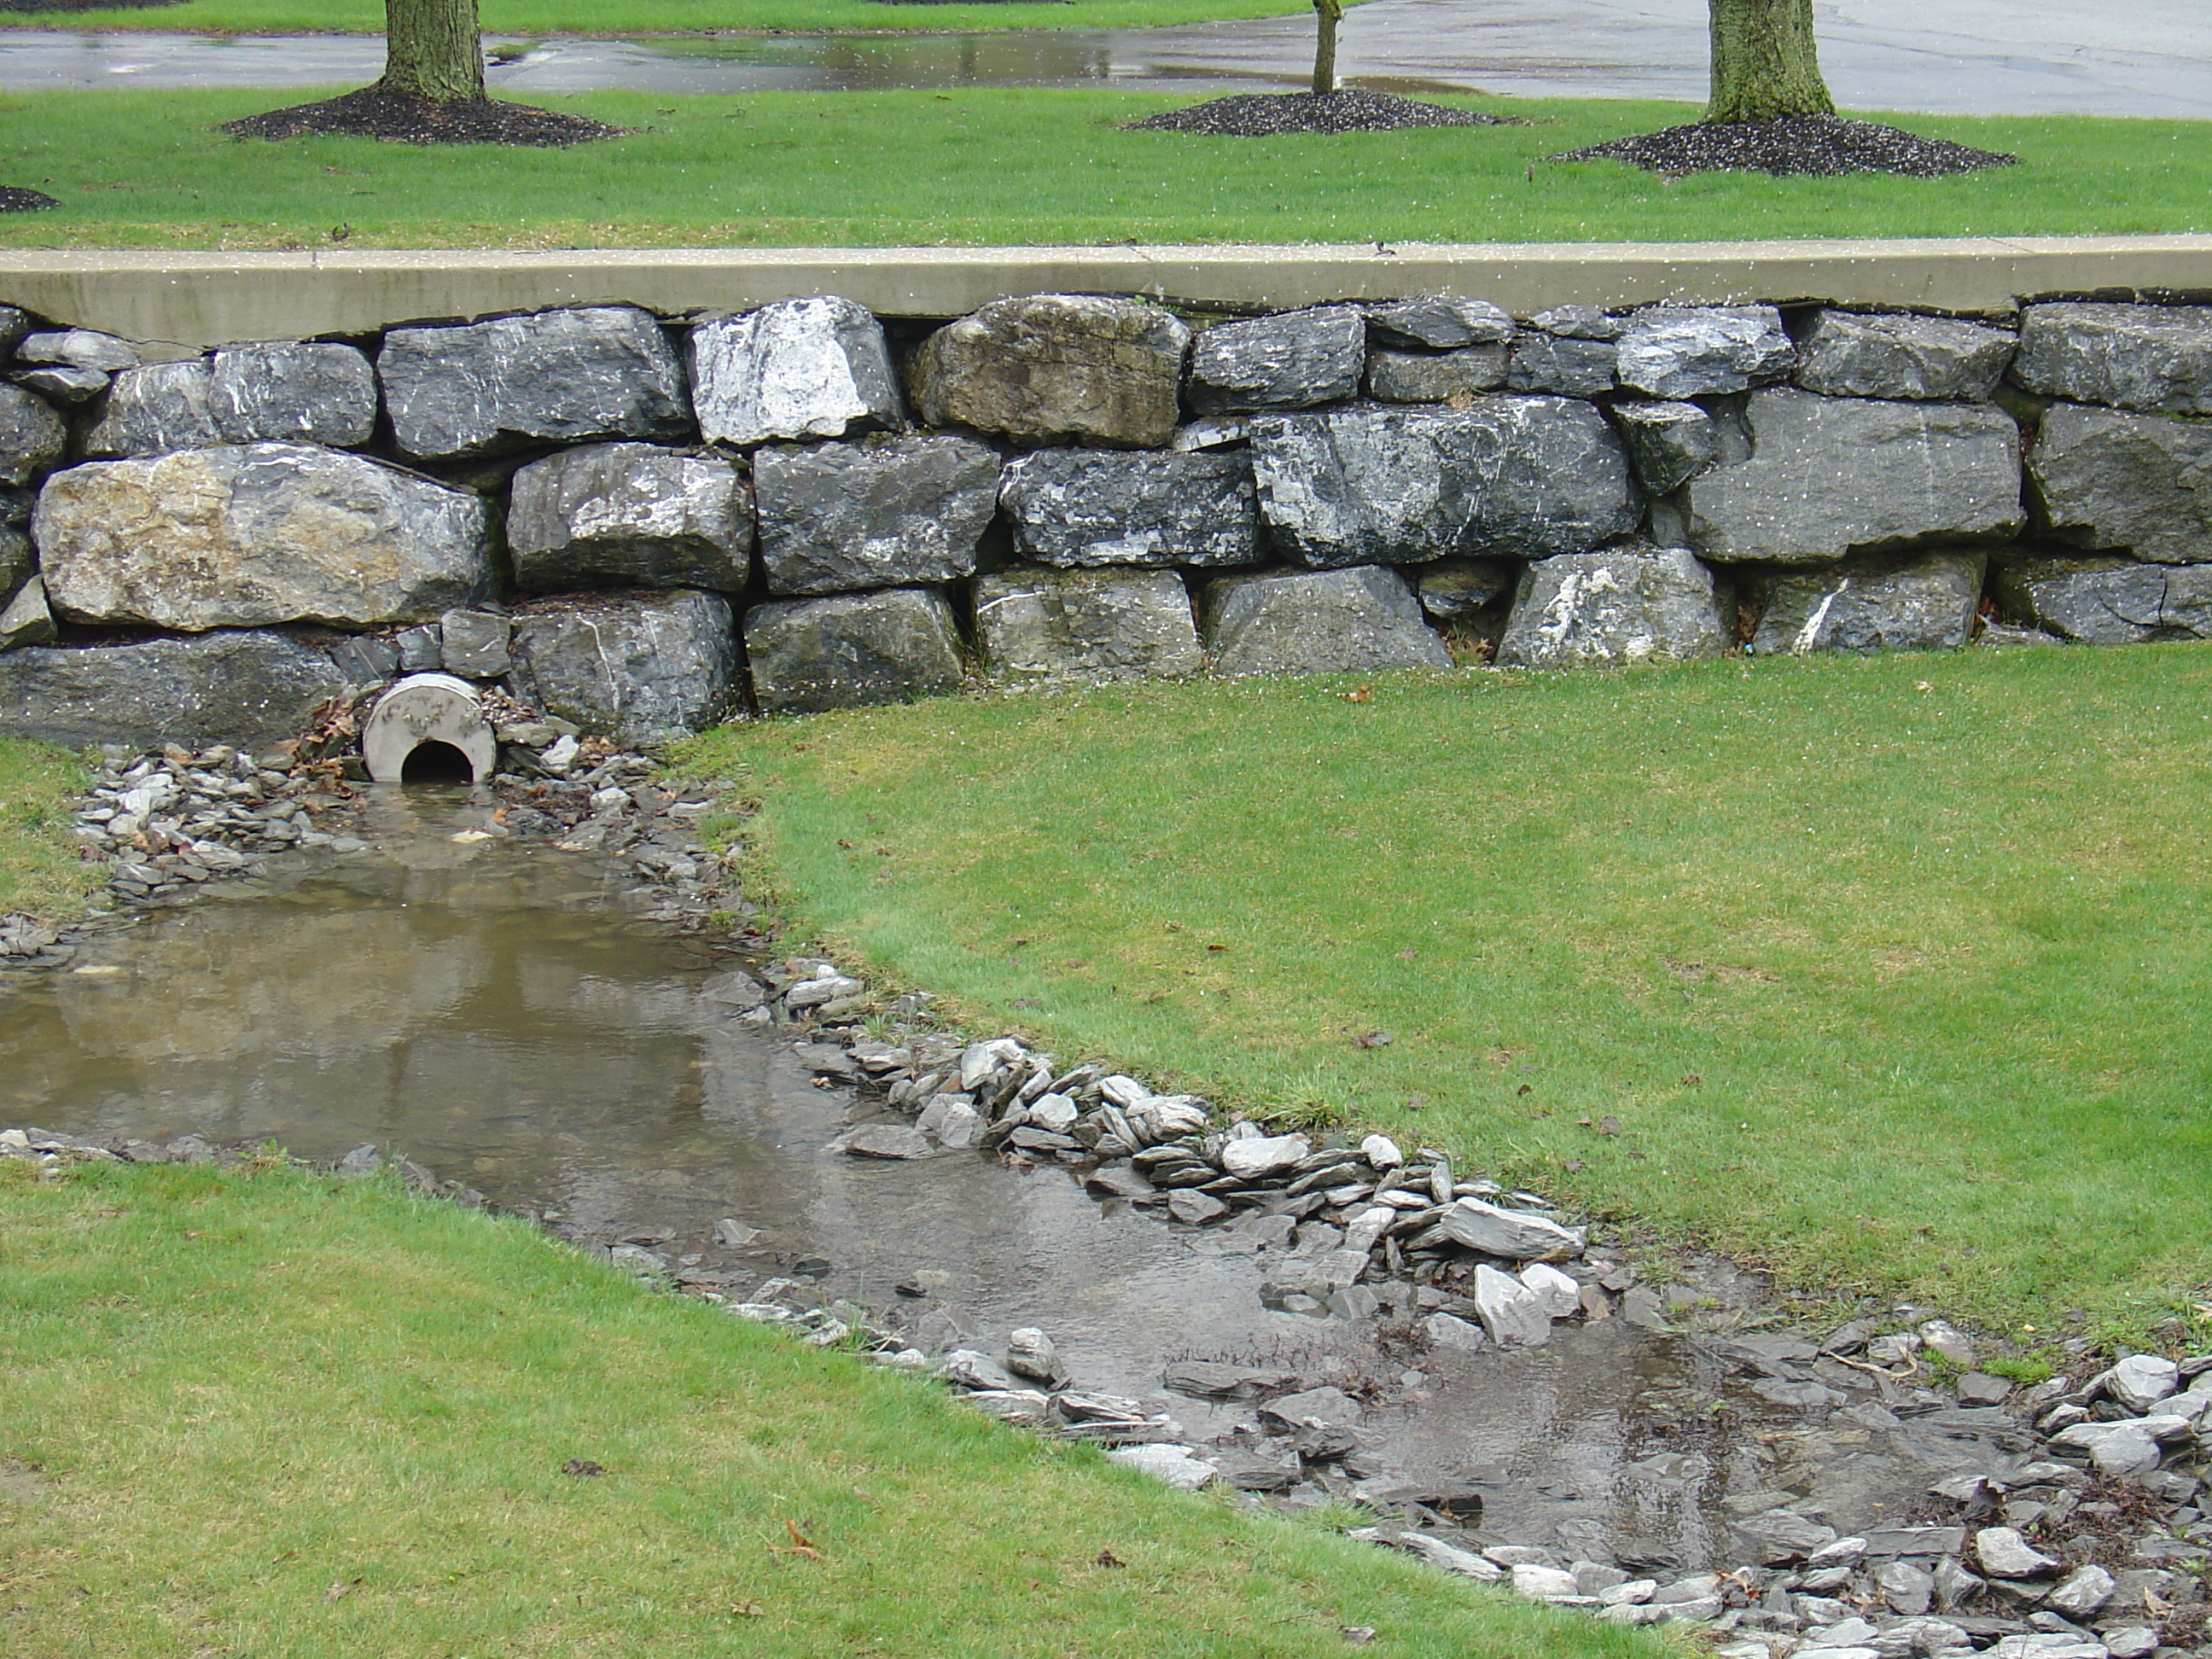 A drainage ditch collecting stormwater